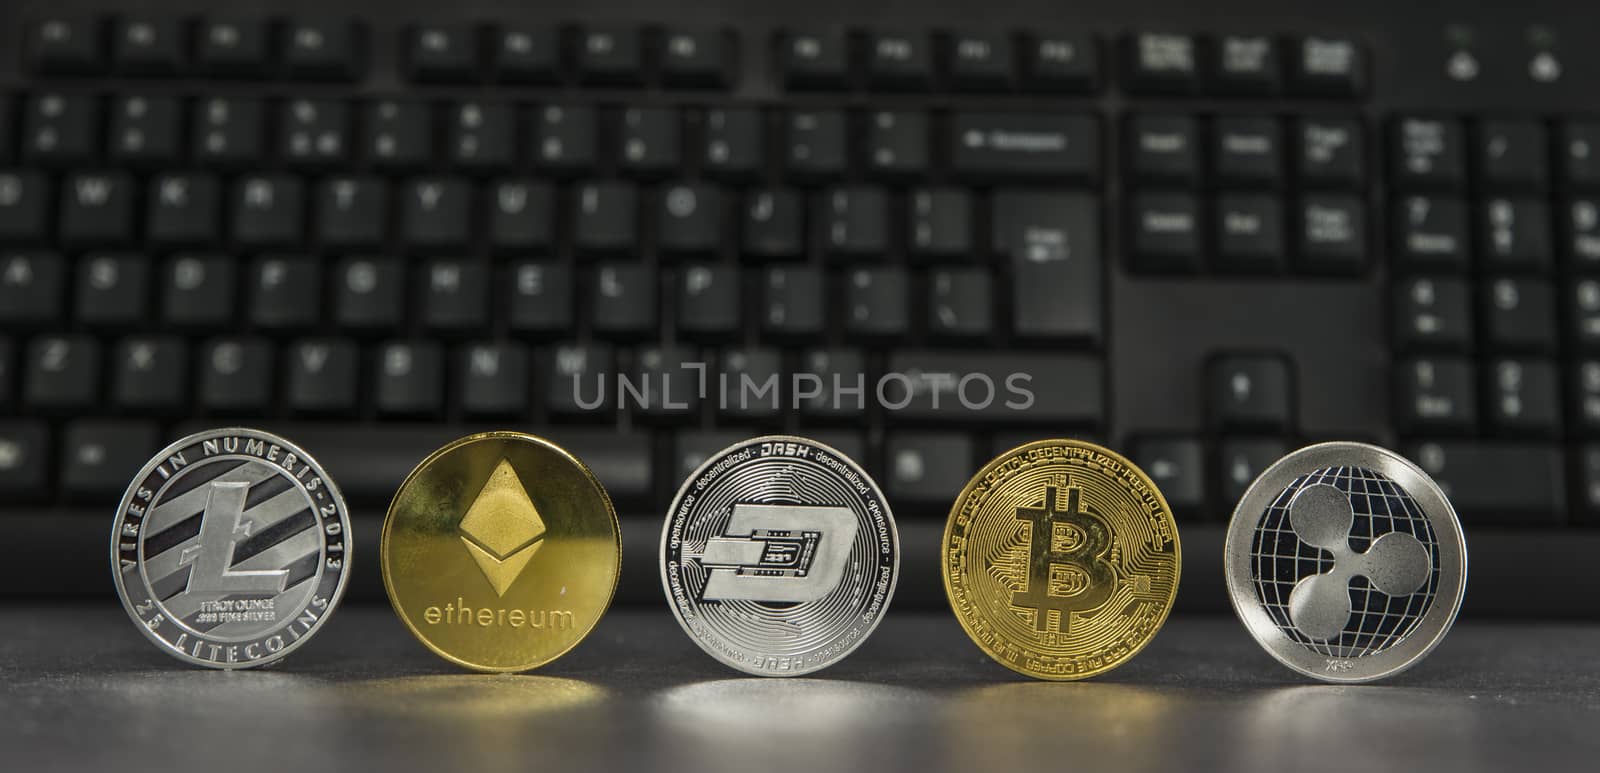 different virtual coins with keyboard background by compuinfoto